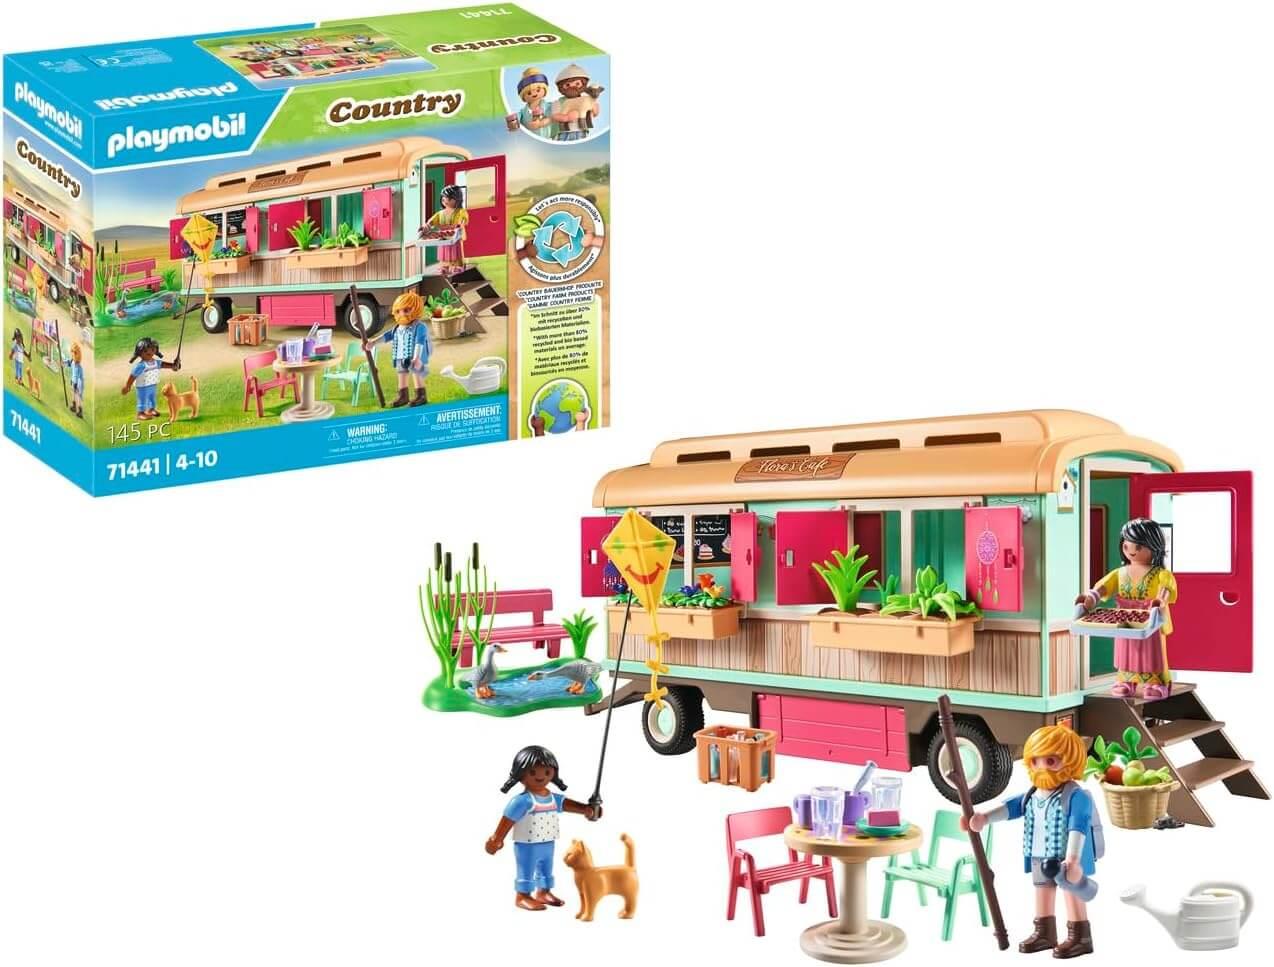 Playmobil Country 71441 Cosy Train Café with Vegetable Garden